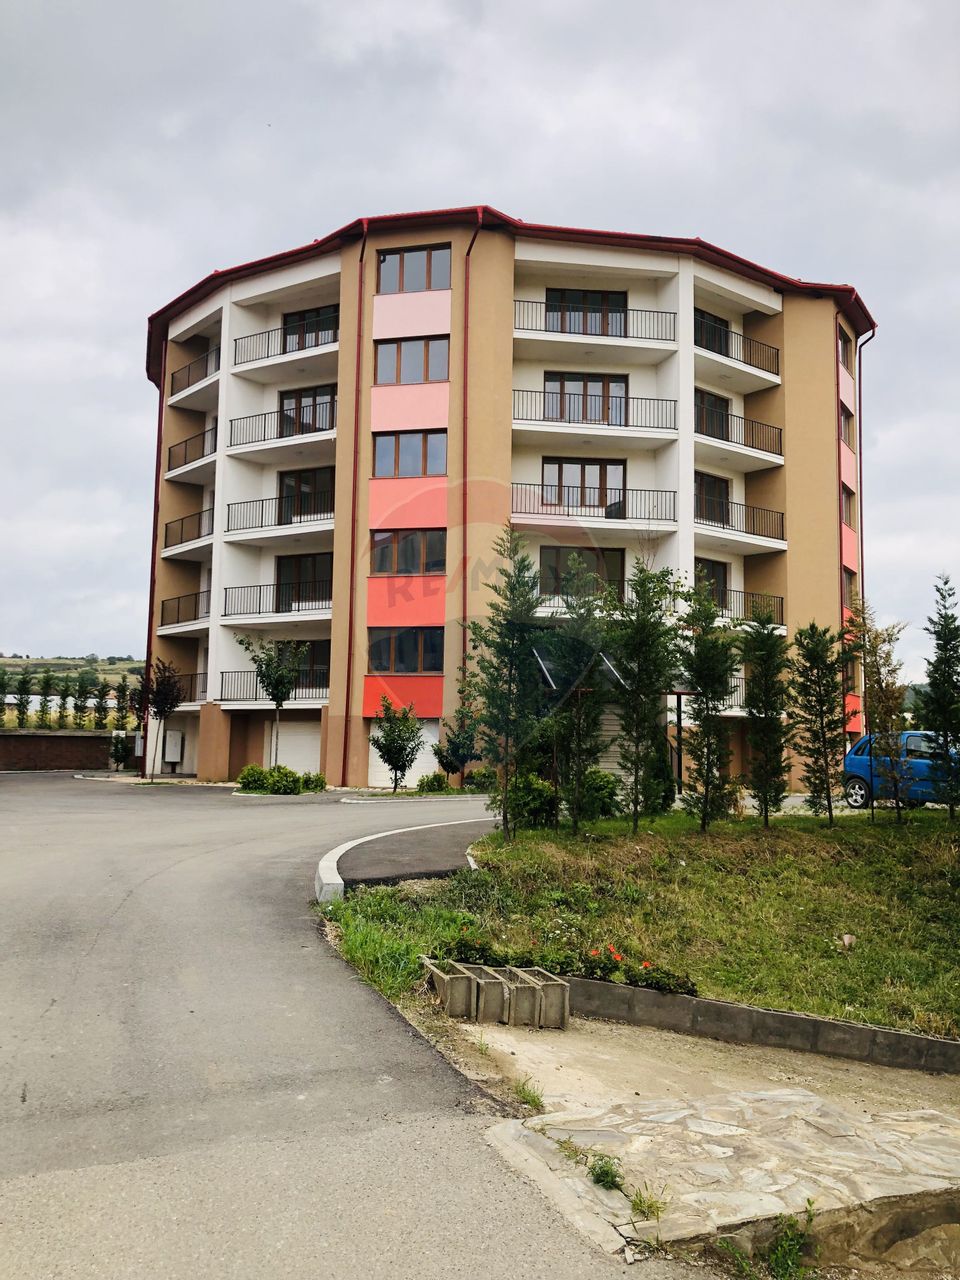 2 room Apartment for sale, Oncea area